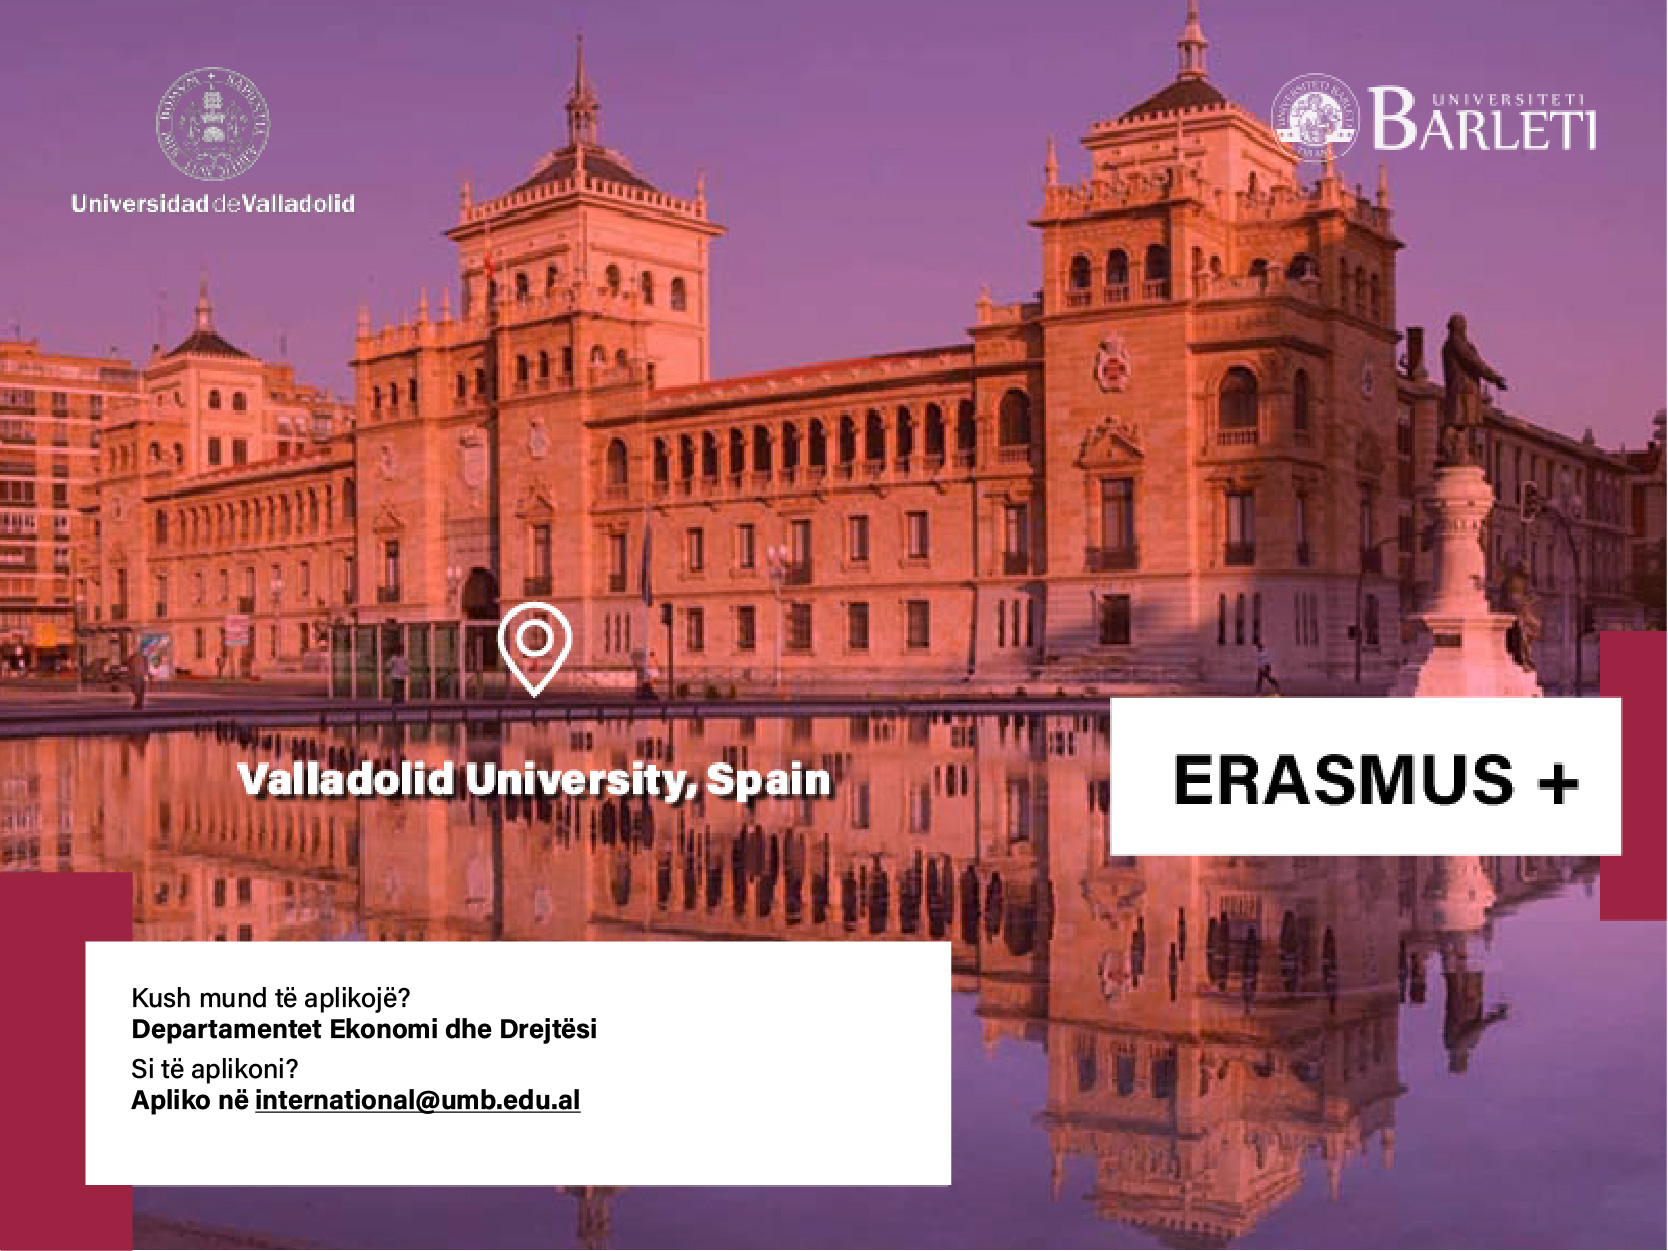 Erasmus call for students is open